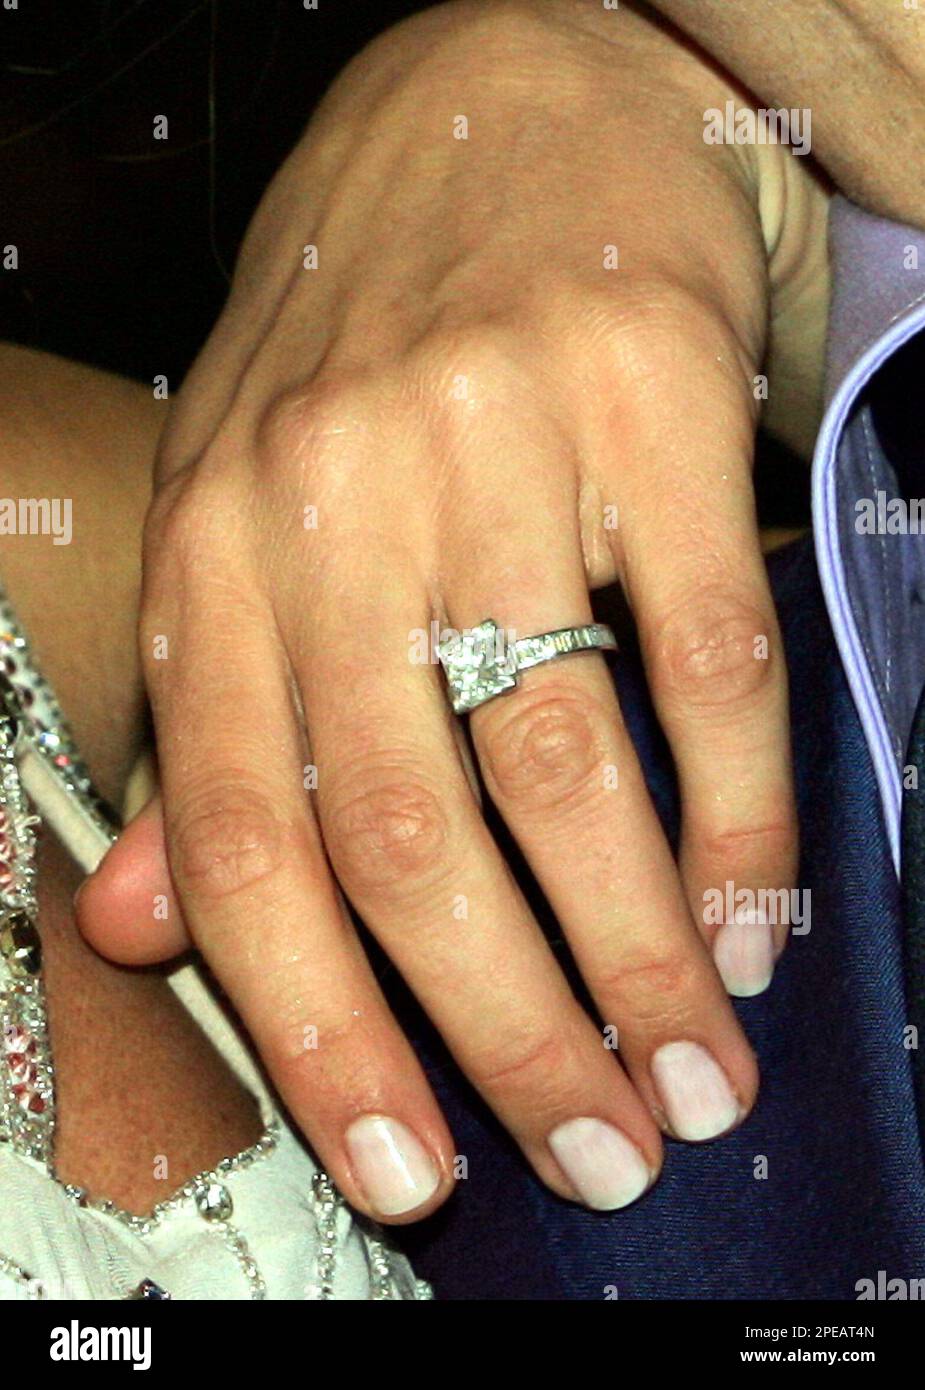 penny lancaster shows her princess cut diamond engagement ring after the announcement that she will marry rock star rod stewart in central london saturday march 12 2005 the couple are expected to marry in a church service somewhere in europe later in 2005 ap photomartin cleaver 2PEAT4N